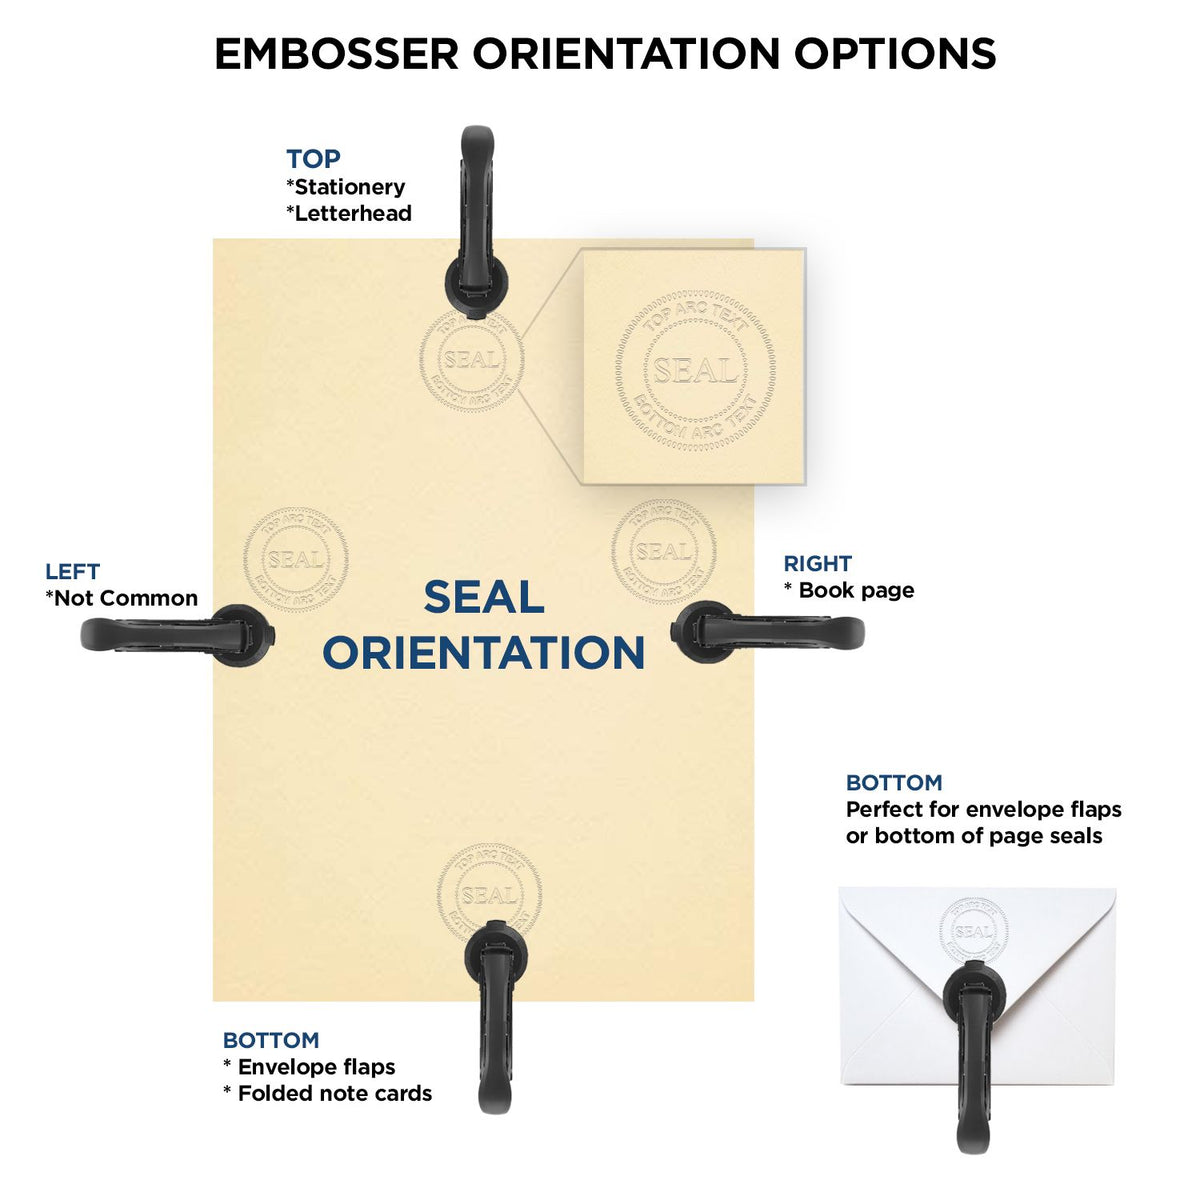 An infographic for the State of Washington Soft Land Surveyor Embossing Seal showing embosser orientation, this is showing examples of a top, bottom, right and left insert.